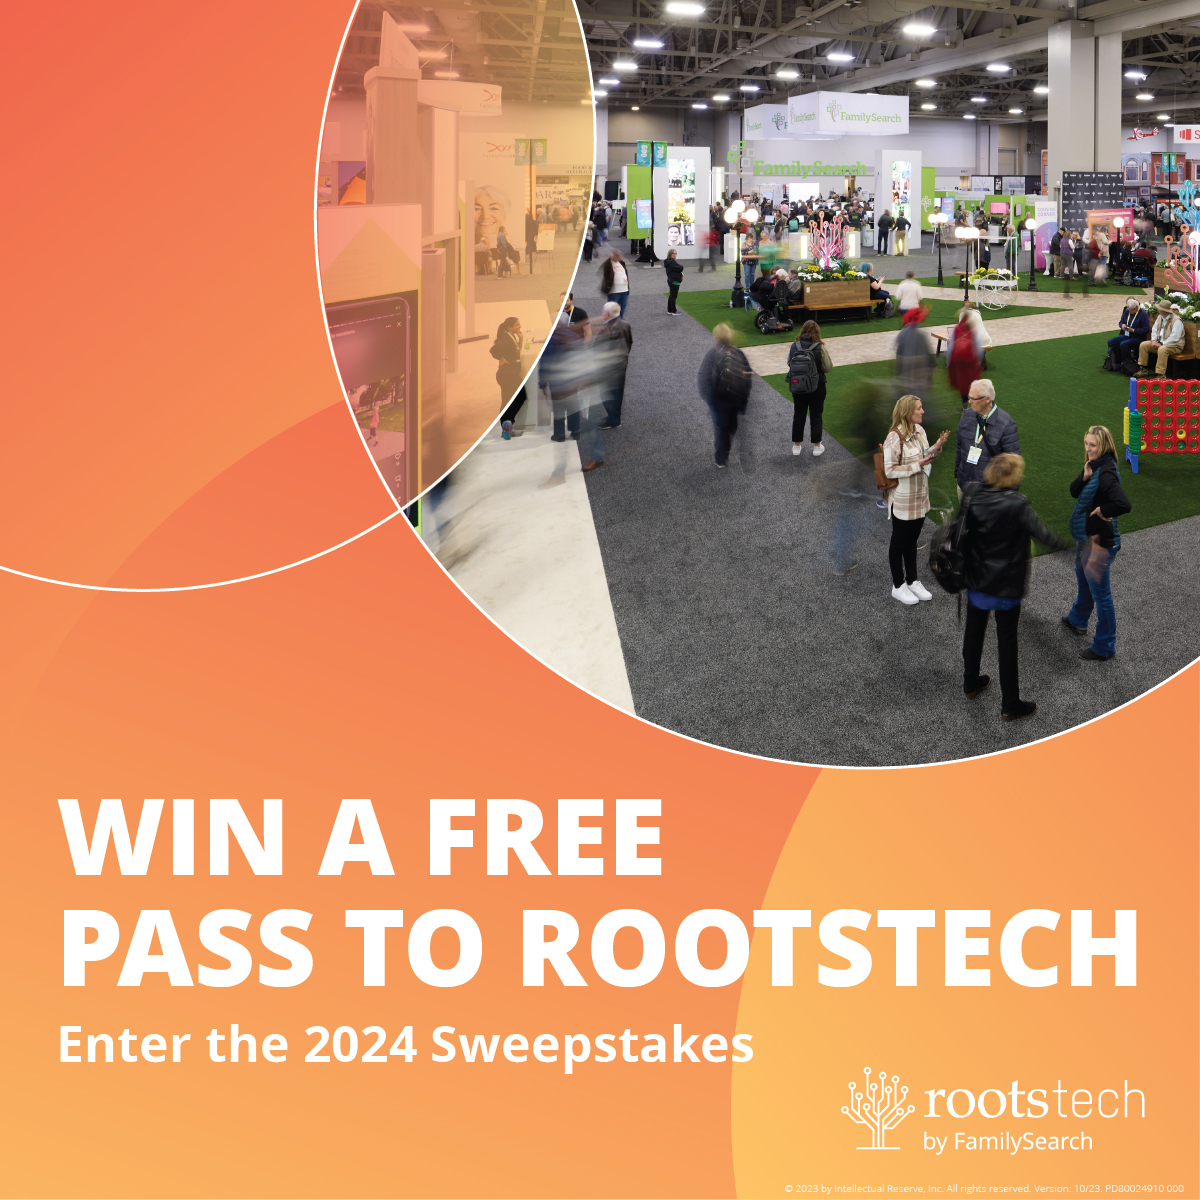 RootsTech 2024 Pass Sweepstakes: Welcome to the RootsTech Pass Sweepstakes! We are so glad you are interested in entering for a chance to receive a free 3-day RootsTech pass to come and learn more about genealogy at RootsTech 2024.